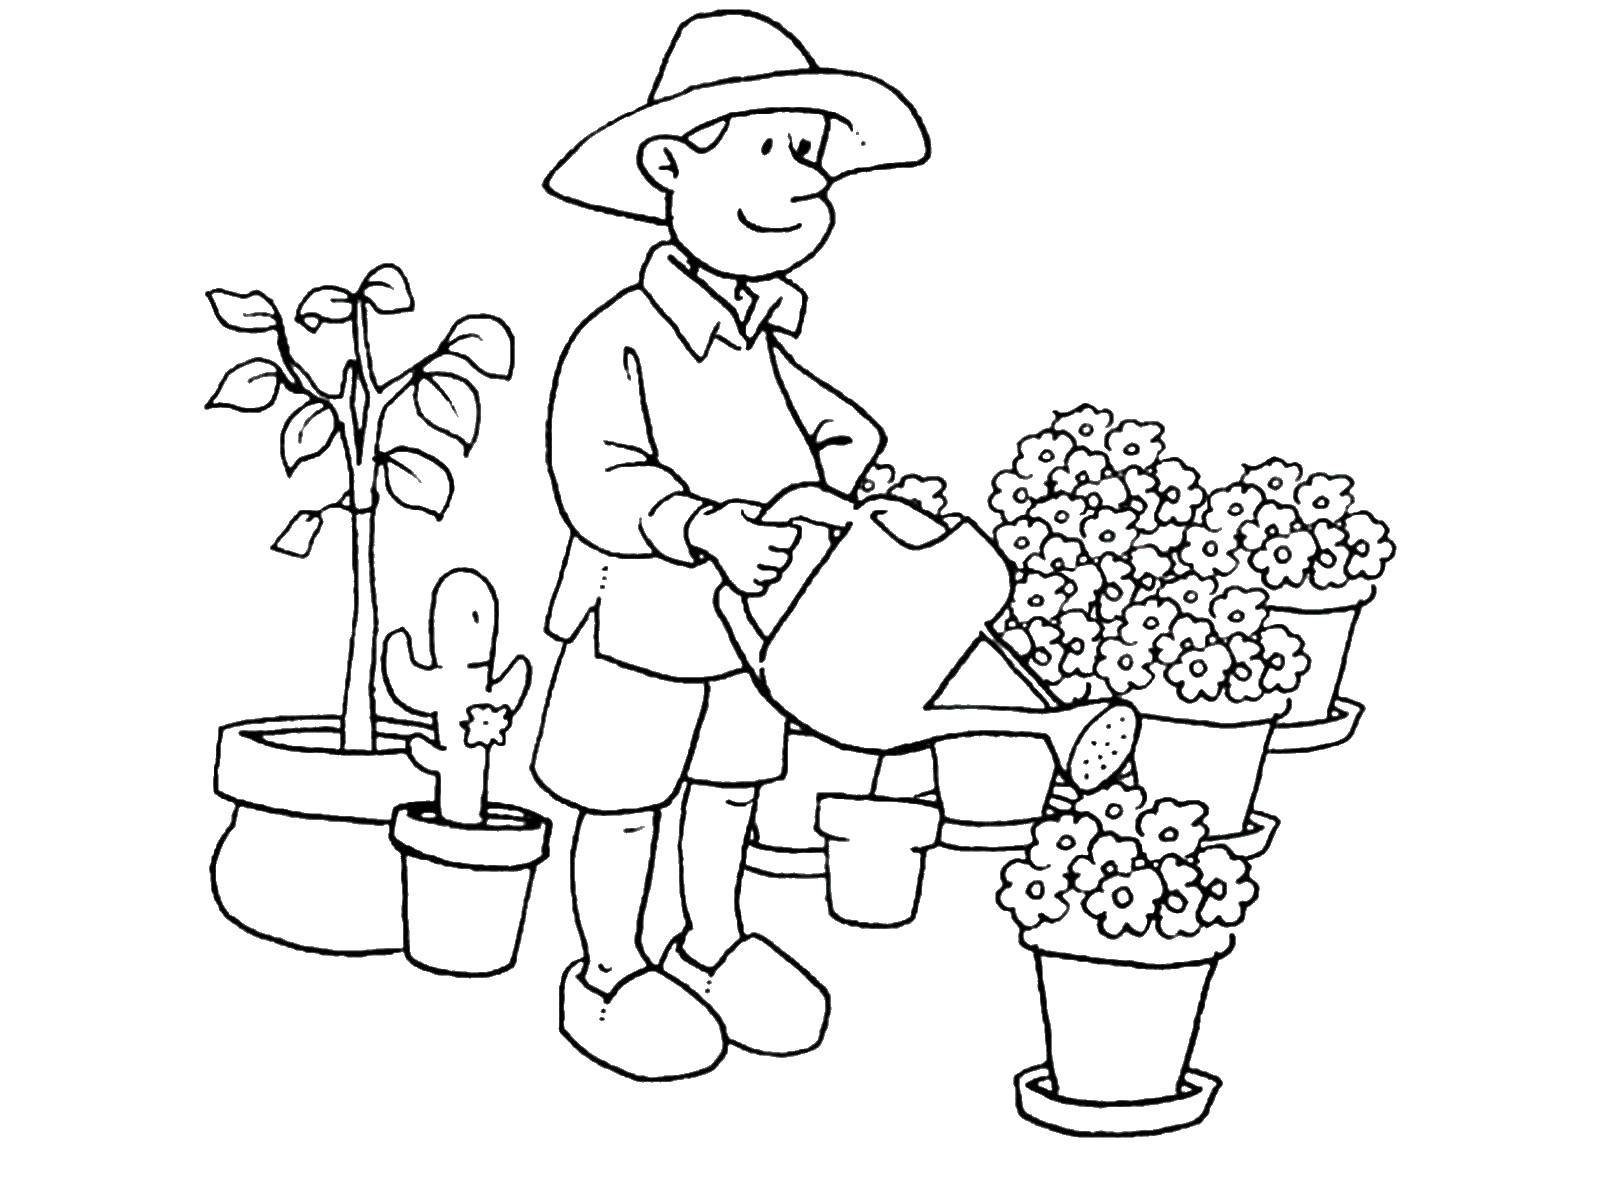 Coloring The gardener. Category a profession. Tags:  Profession.